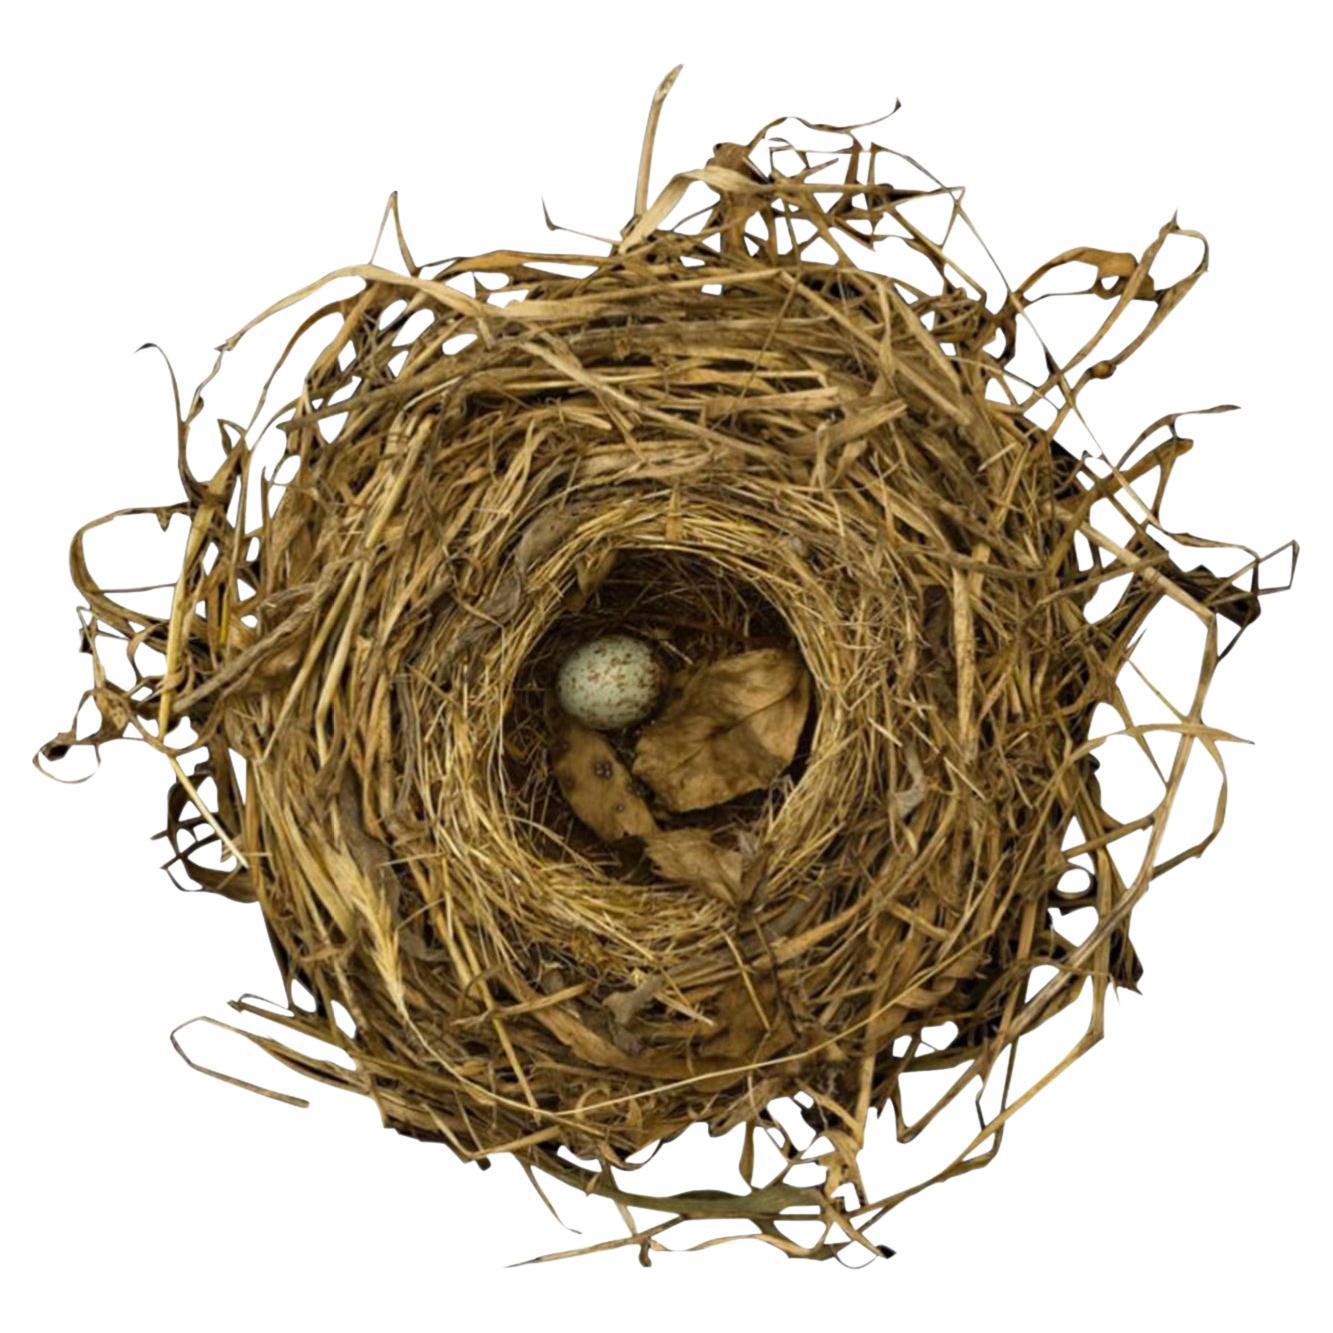 Sharon Beals Lithograph of a Song Sparrow Nest. It is one of a limited edition of only 25.